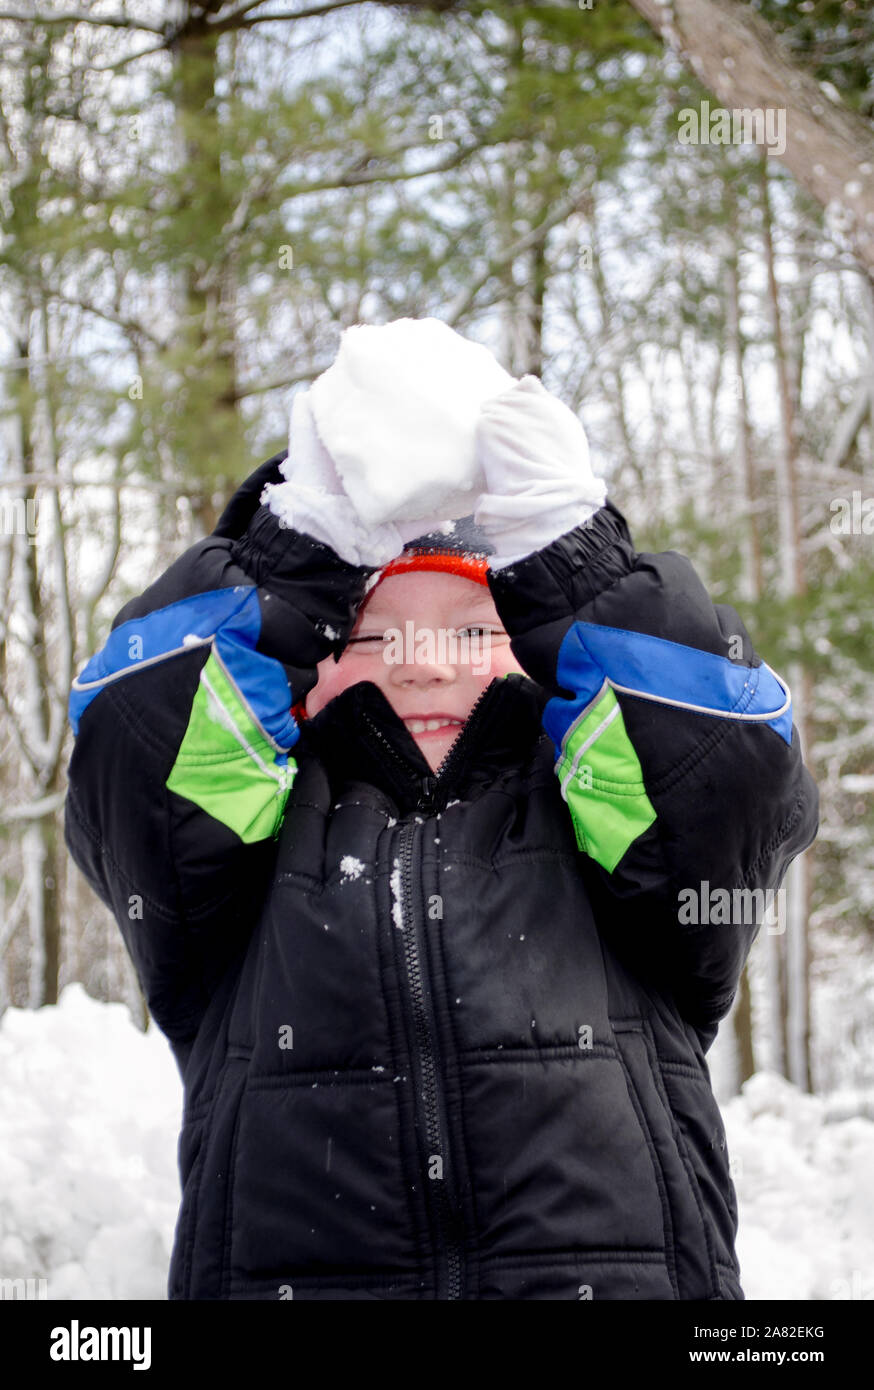 with arms raised, this child is ready to throw a snow ball at you Stock Photo